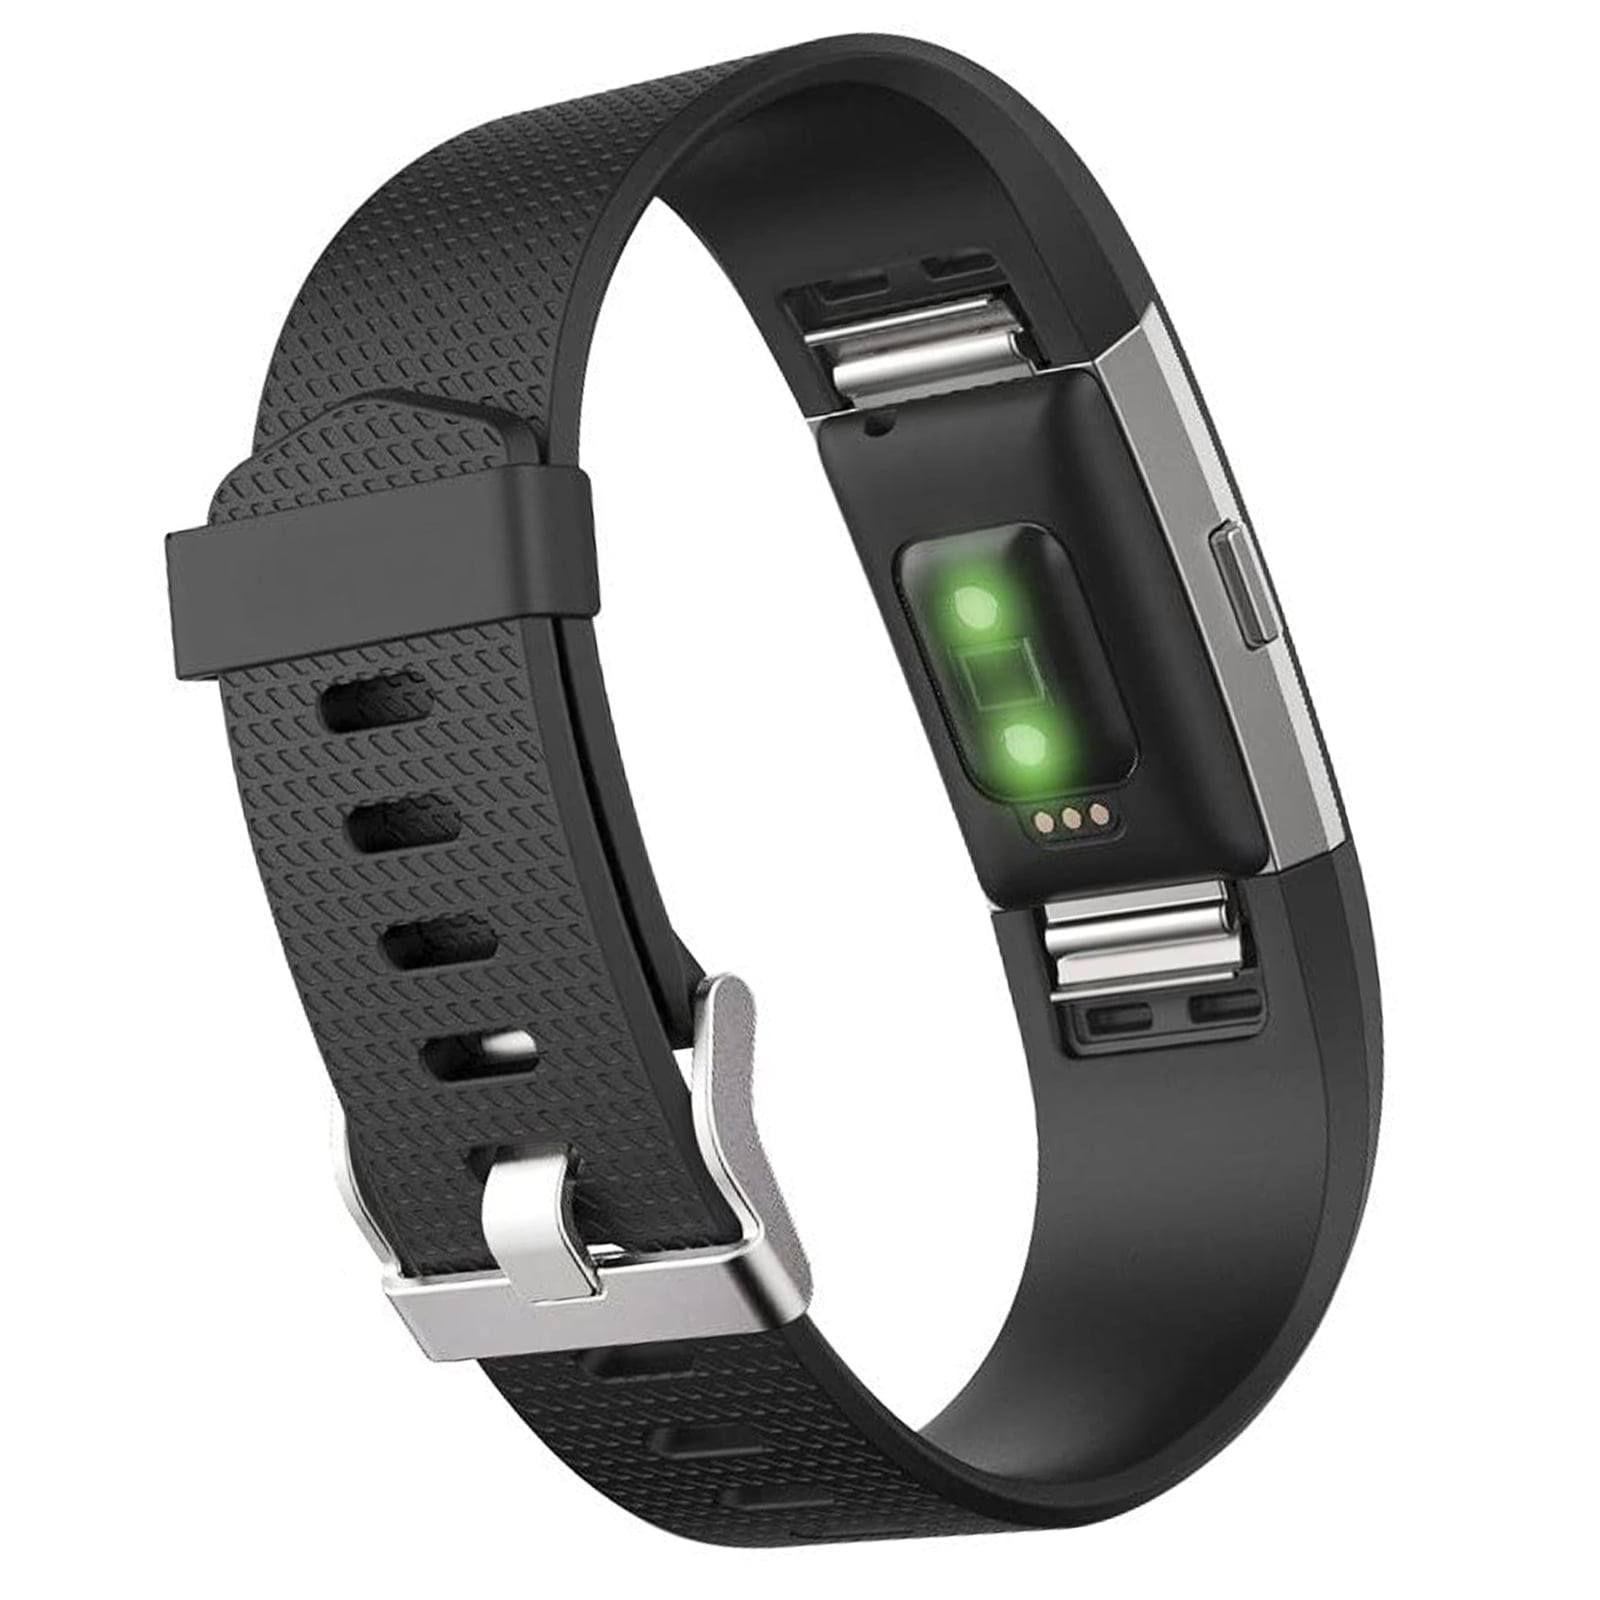 Details about   FITBIT BLAZE LEATHER ACCESSORY BAND & STAINLESS STEEL FRAME SMALL CAMEL 